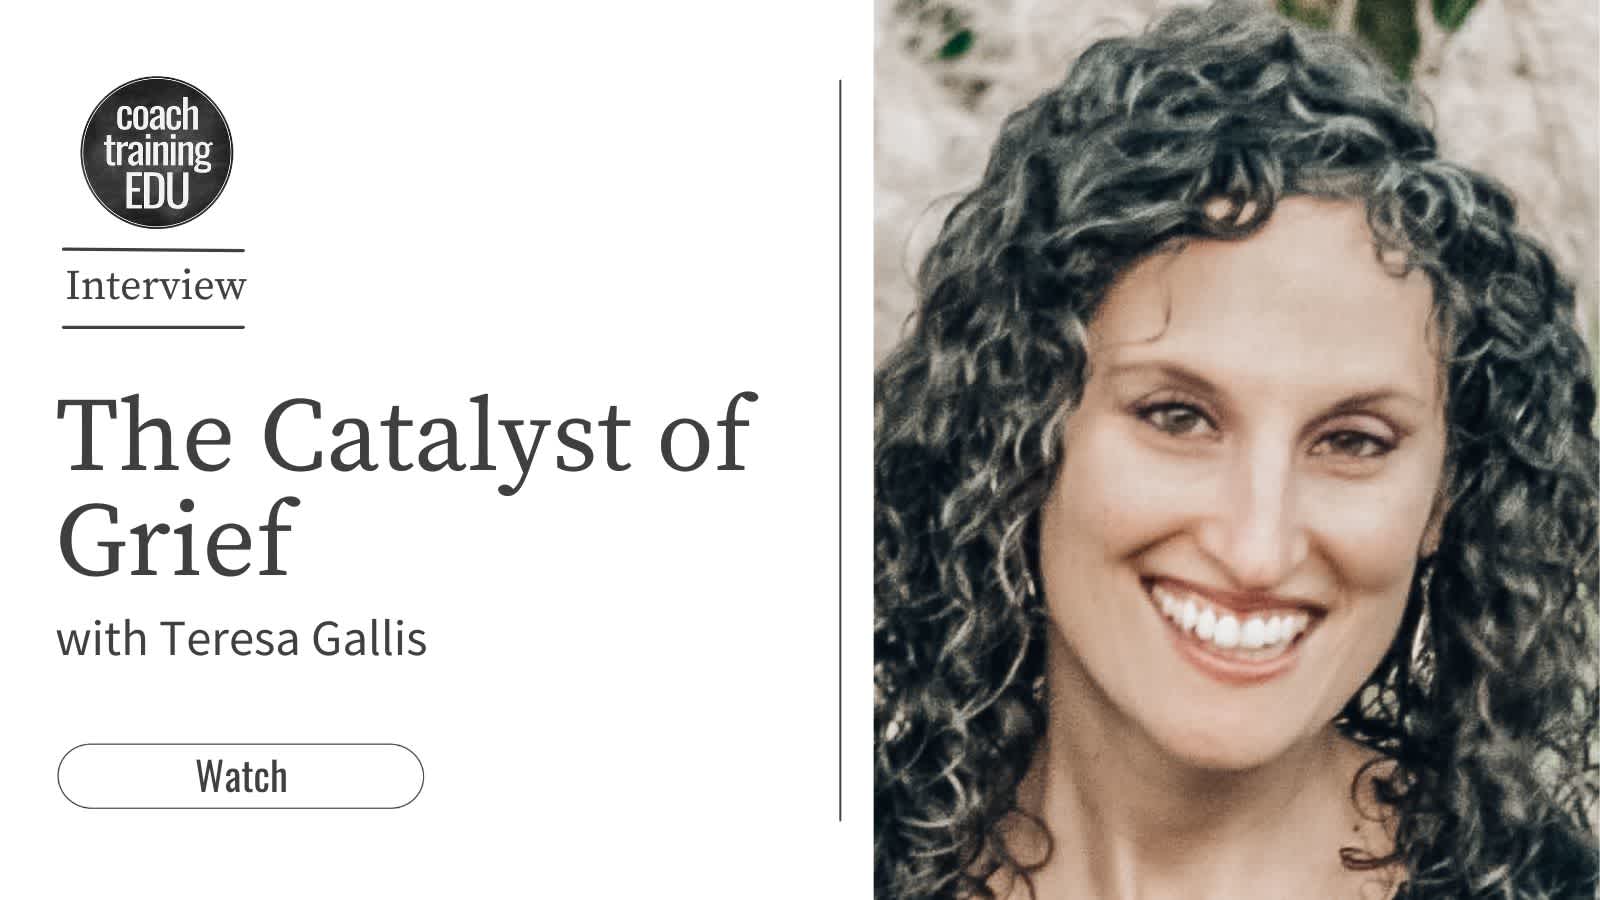 The Catalyst of Grief with Teresa Gallis